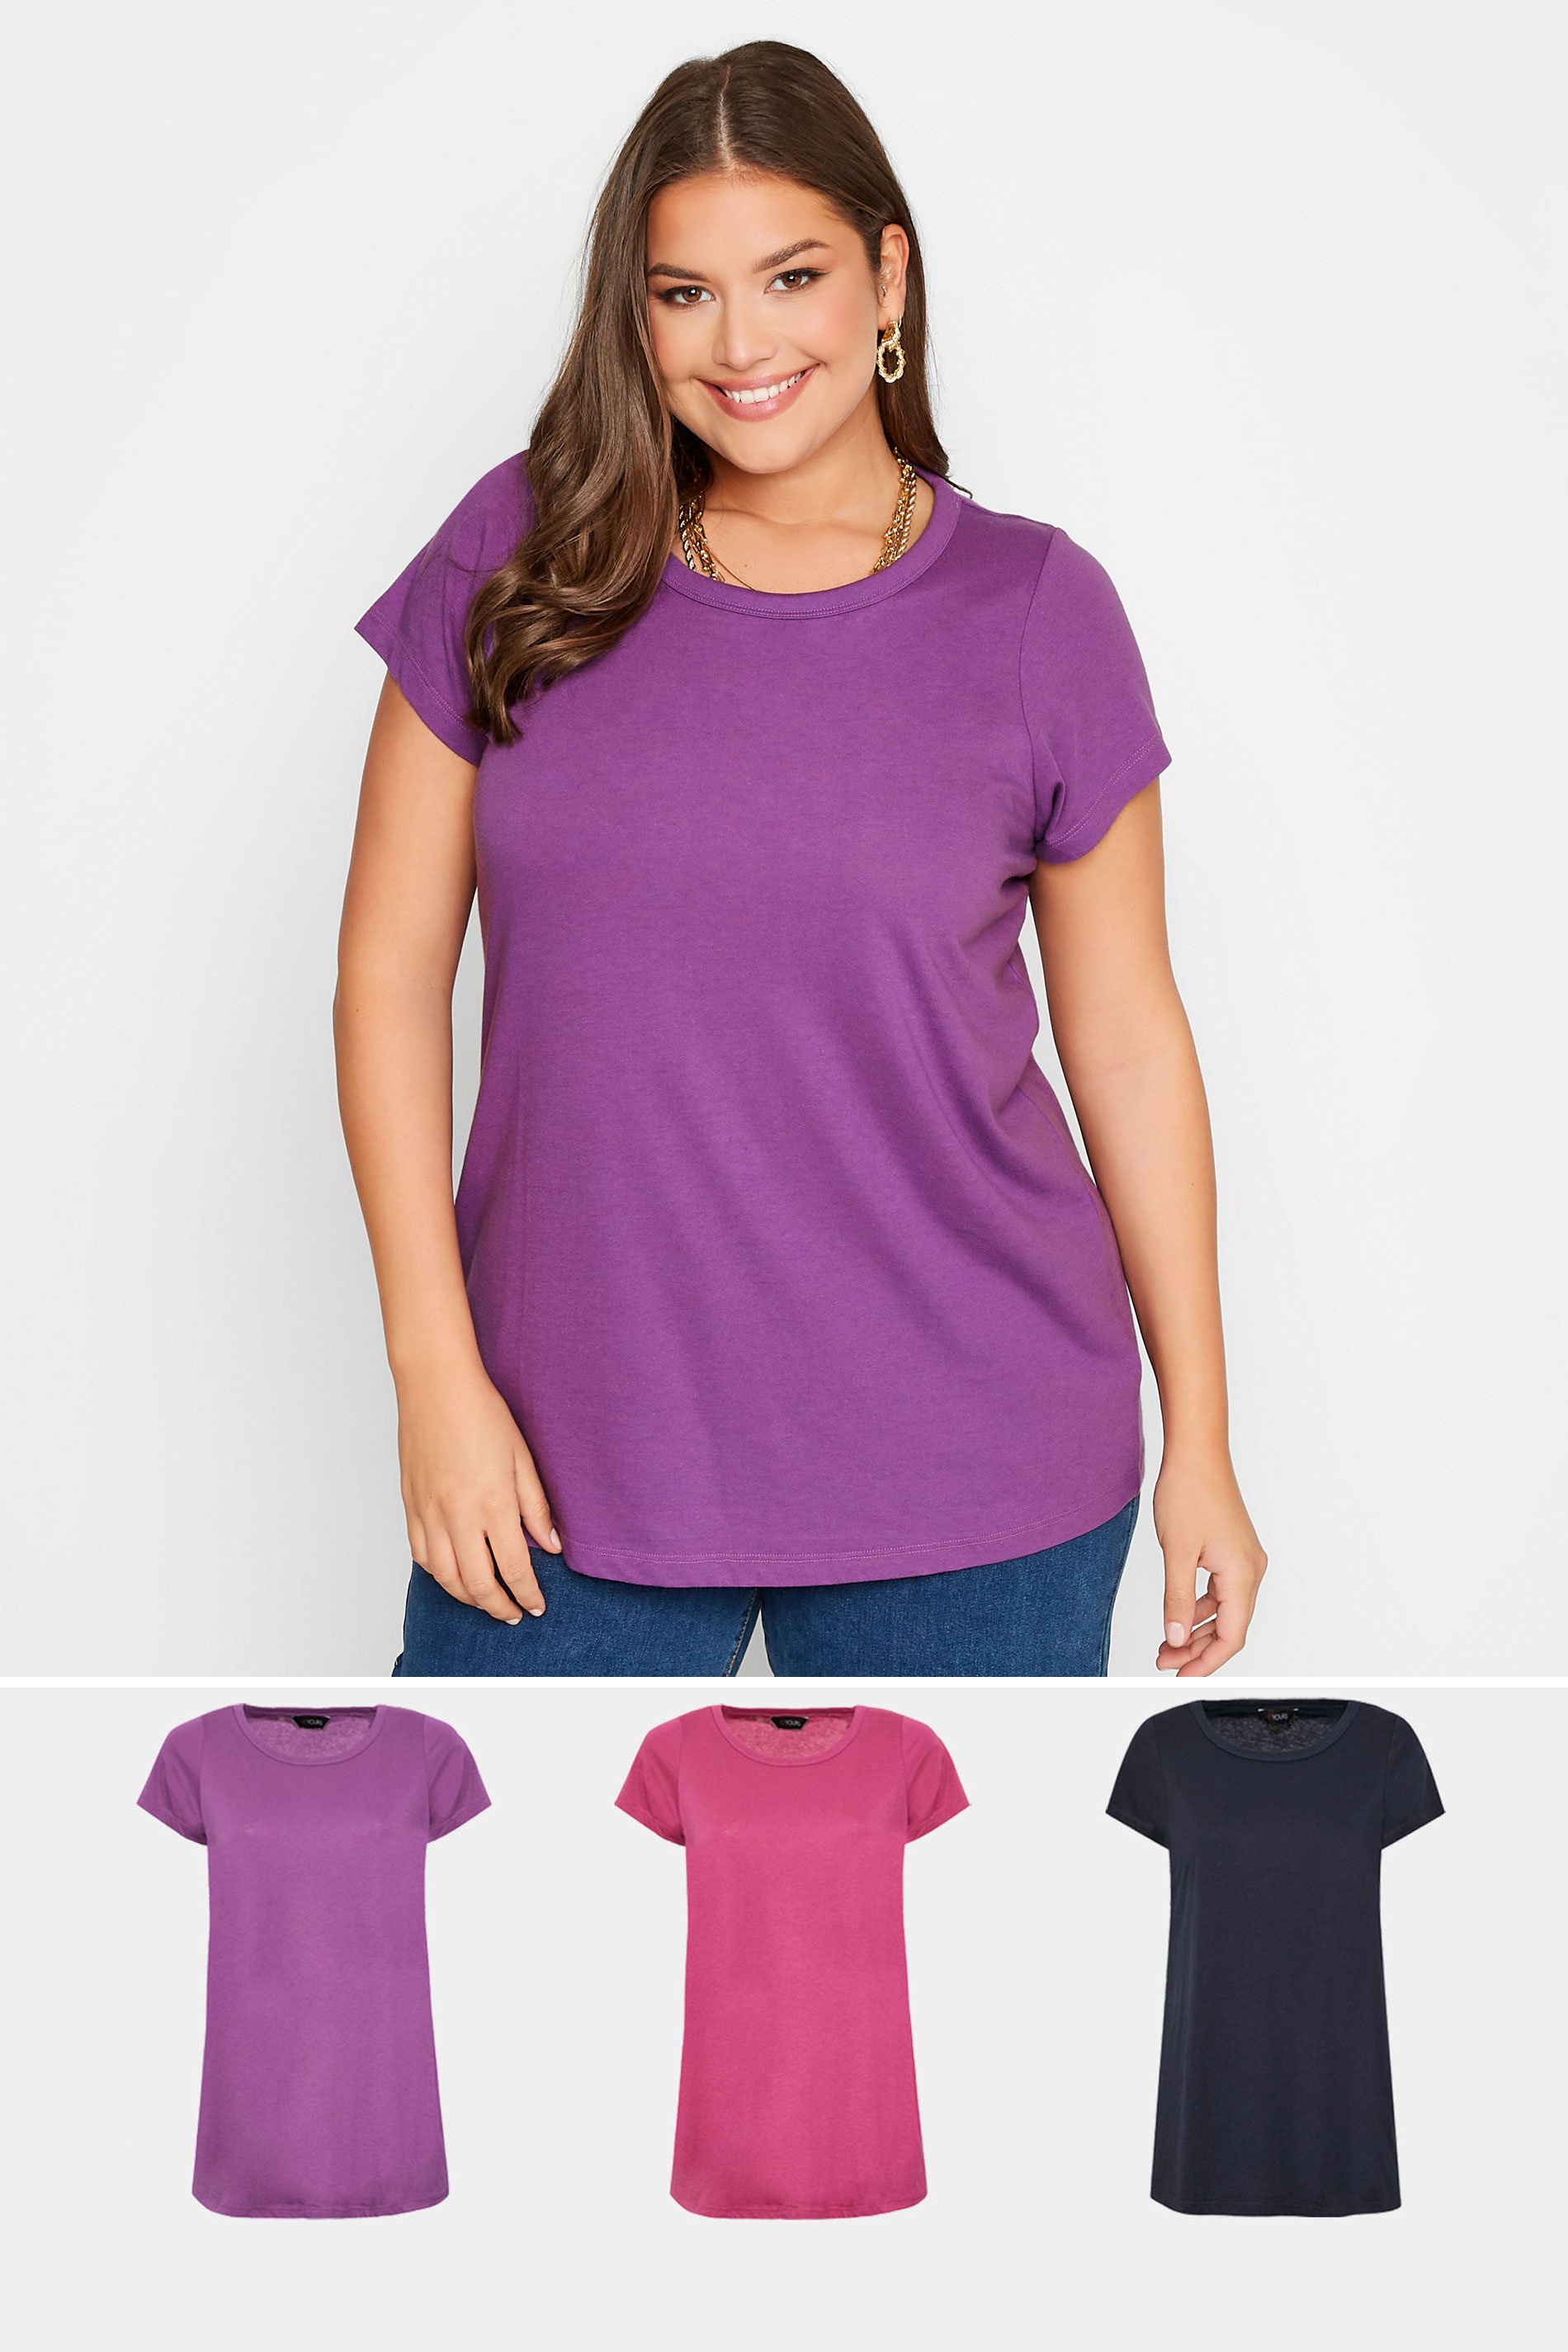 3 PACK Plus Size Purple & Pink T-Shirts | Yours Clothing 1